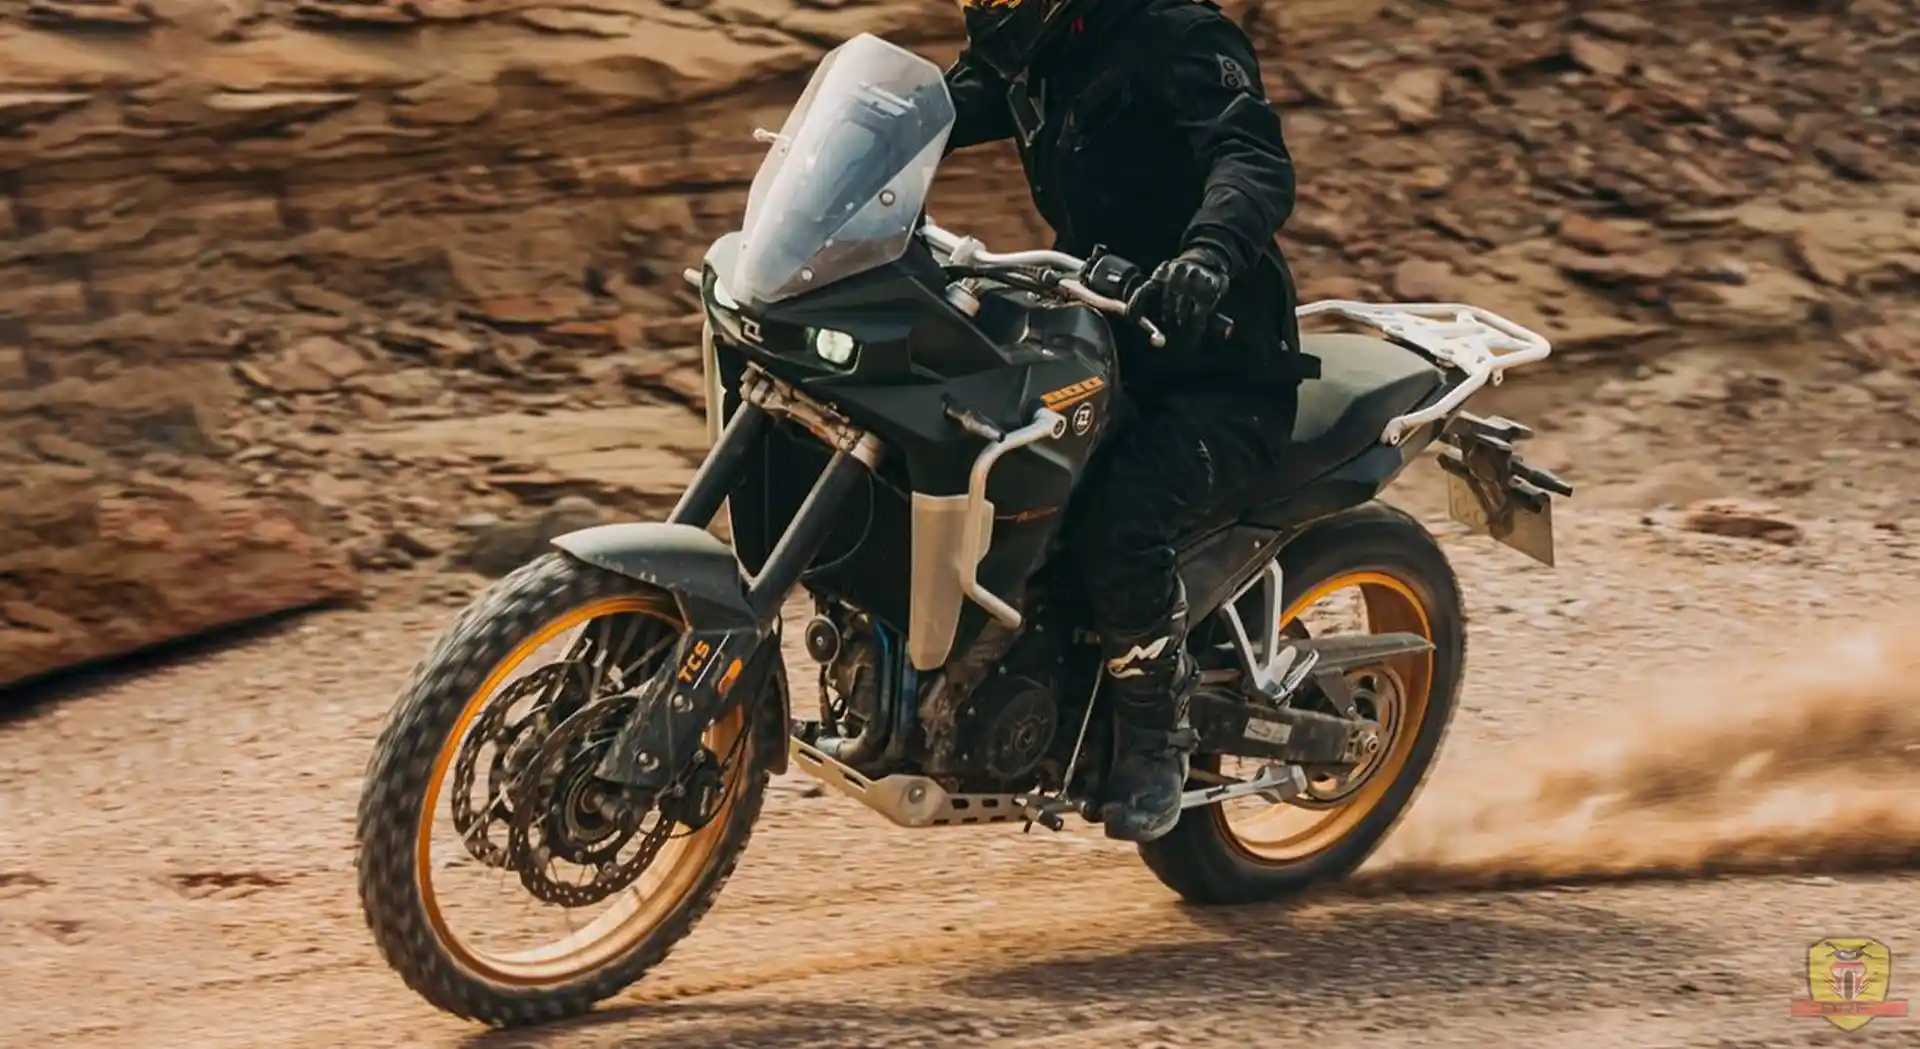 Dakar Rally Style, Kove Moto Launches 800X at Competitive Price